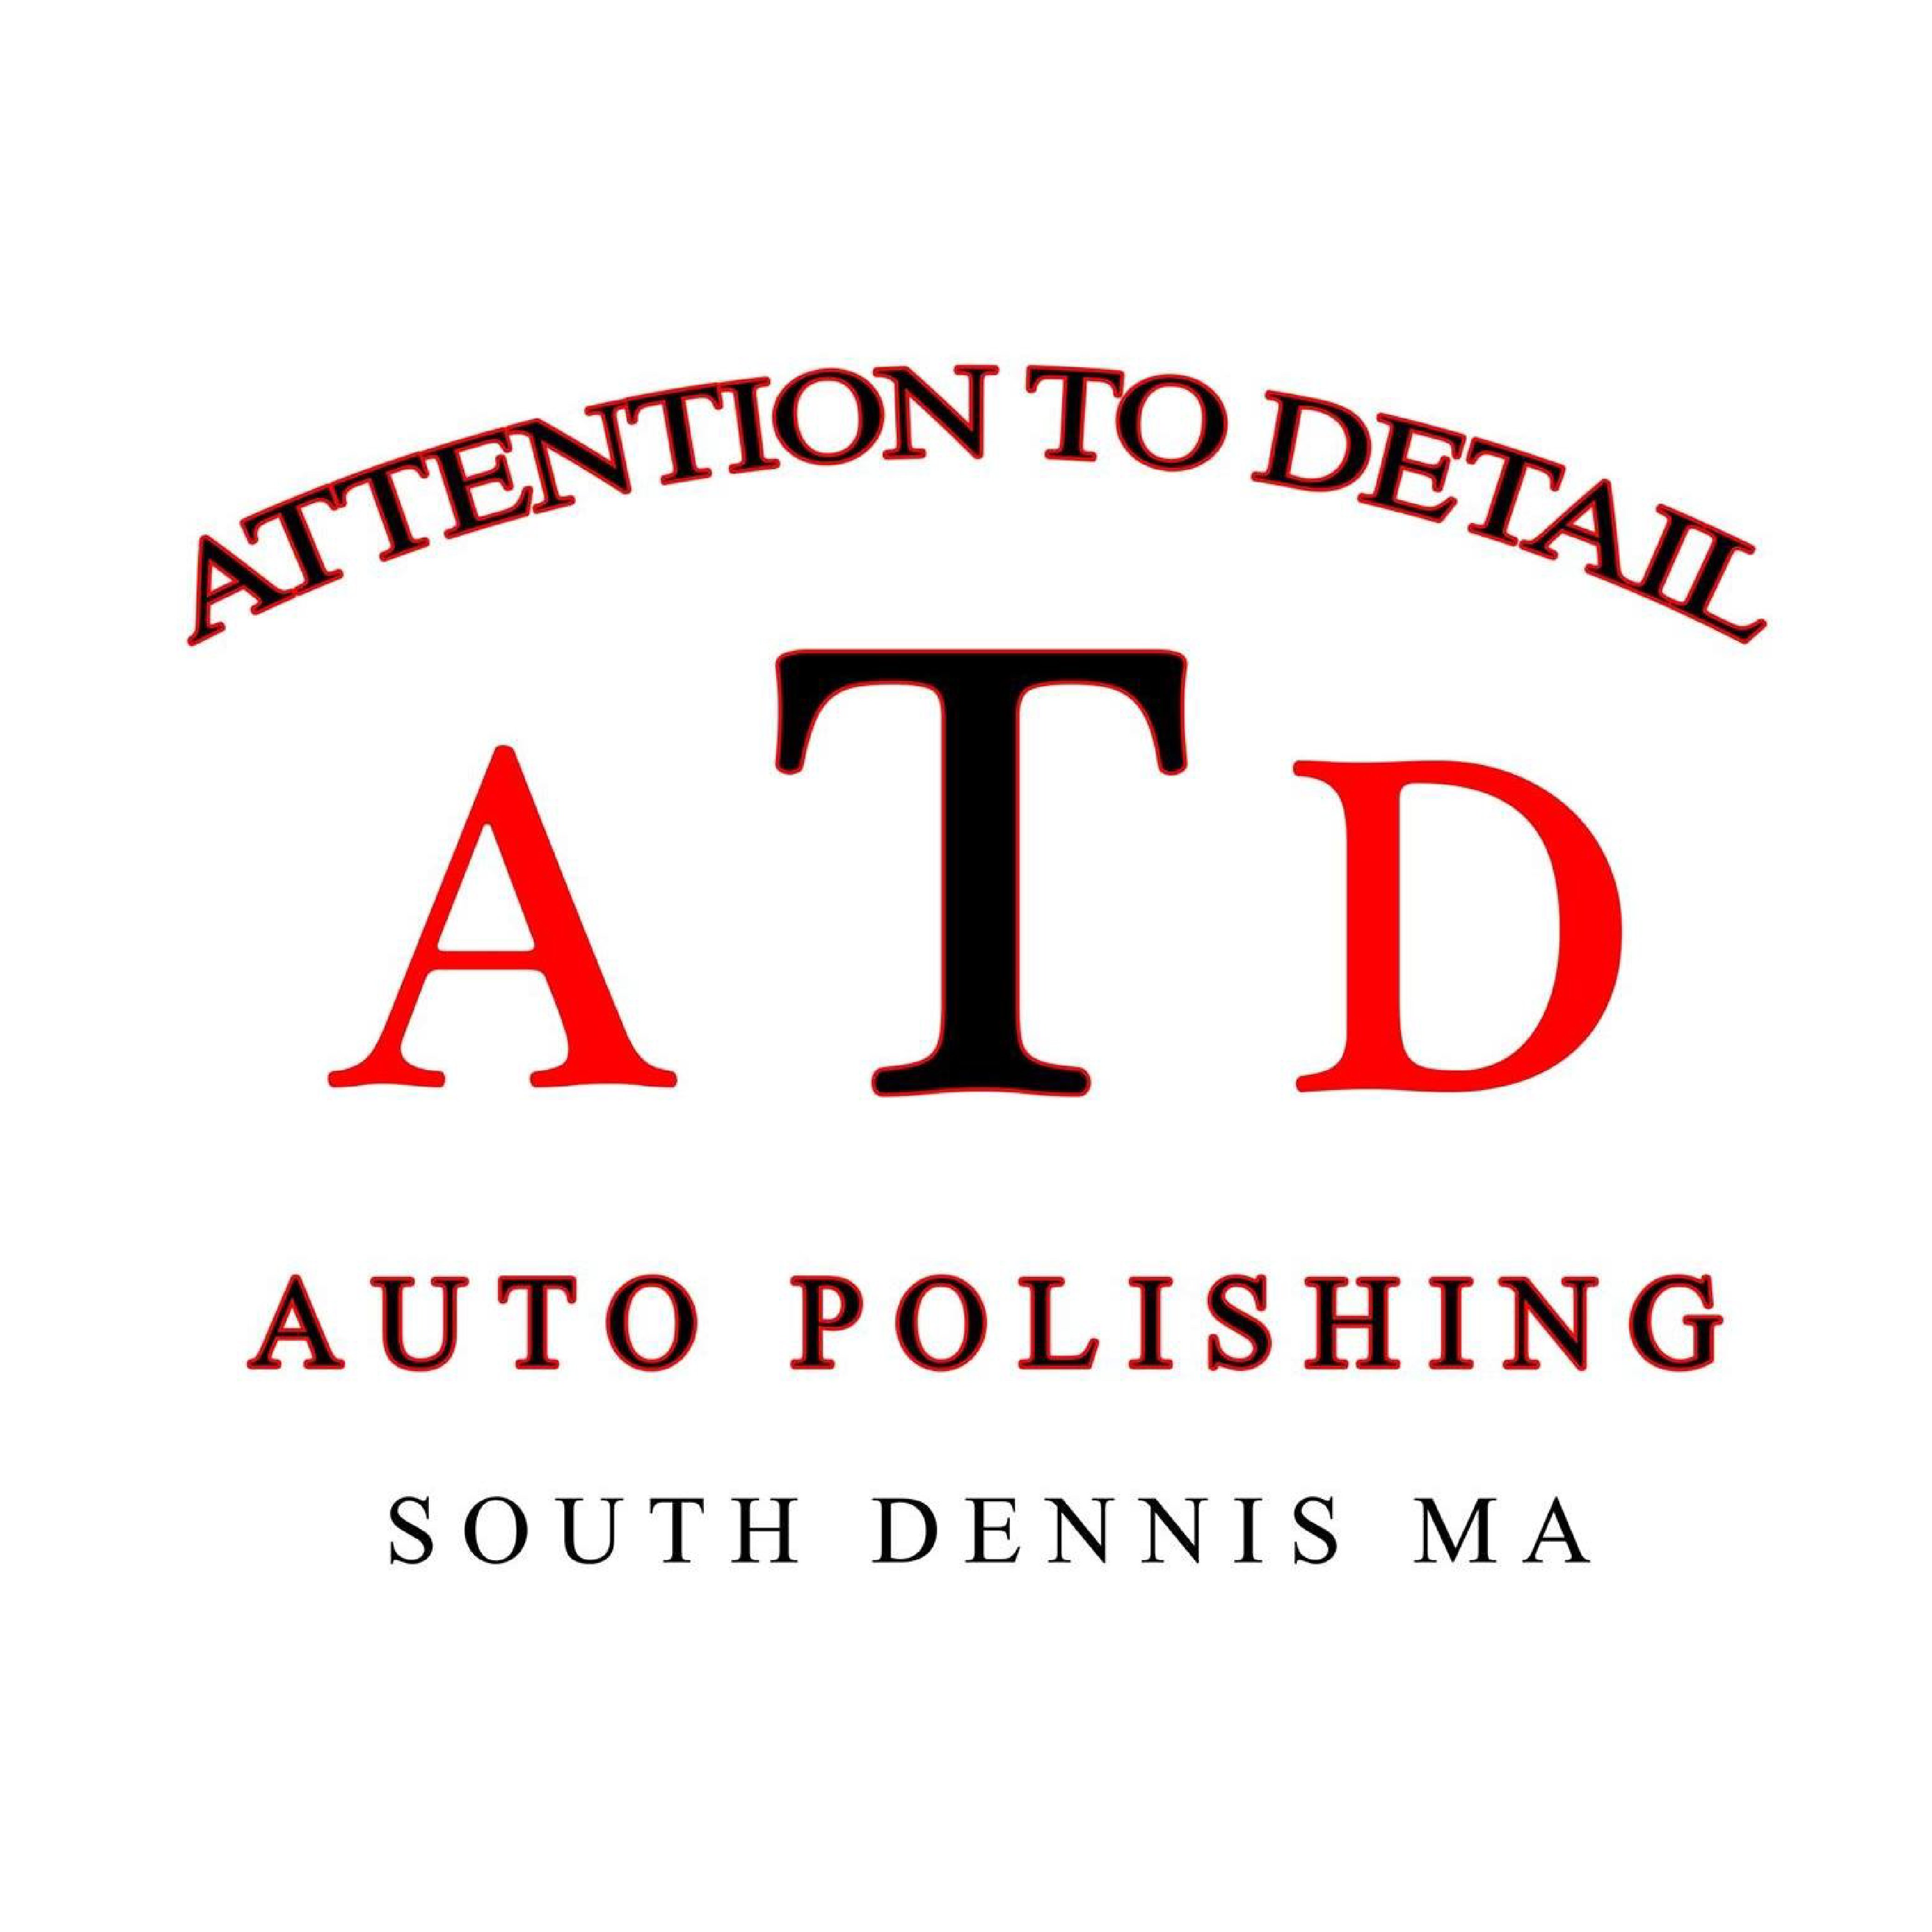 Attention to Detail Auto Polishing